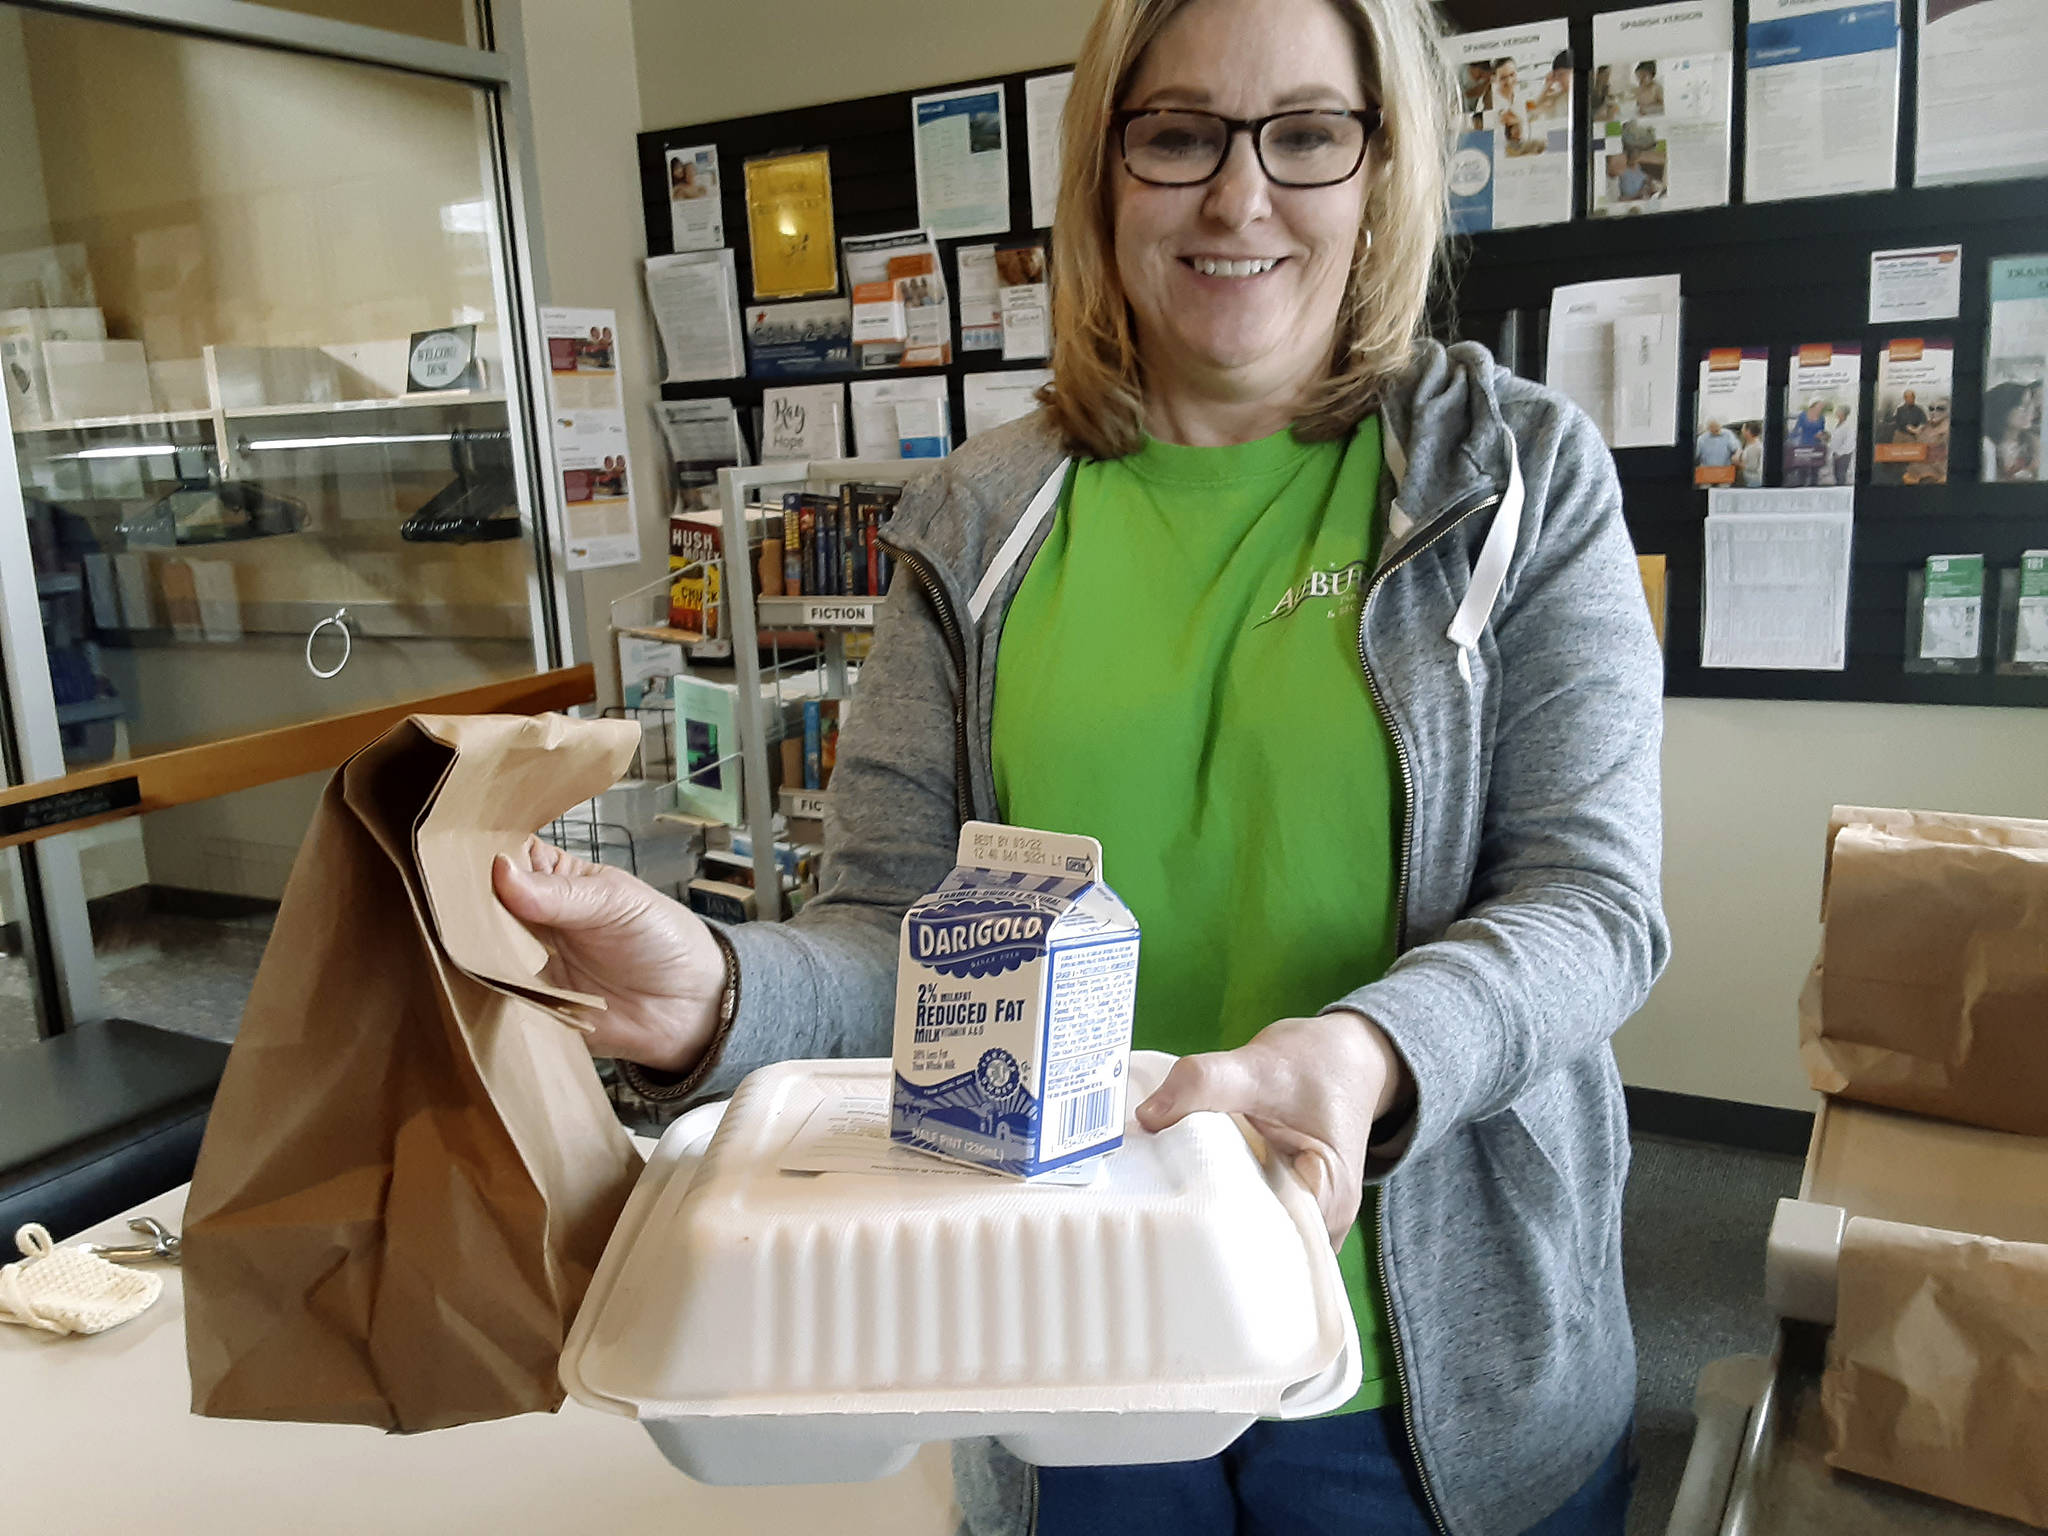 The Auburn Senior Activity Center has closed, but the meal programs roll on, says Director Radine Lozier, here with one of the lunch bags bound for seniors Tuesday afternoon. ROBERT WHALE, Auburn Reporter